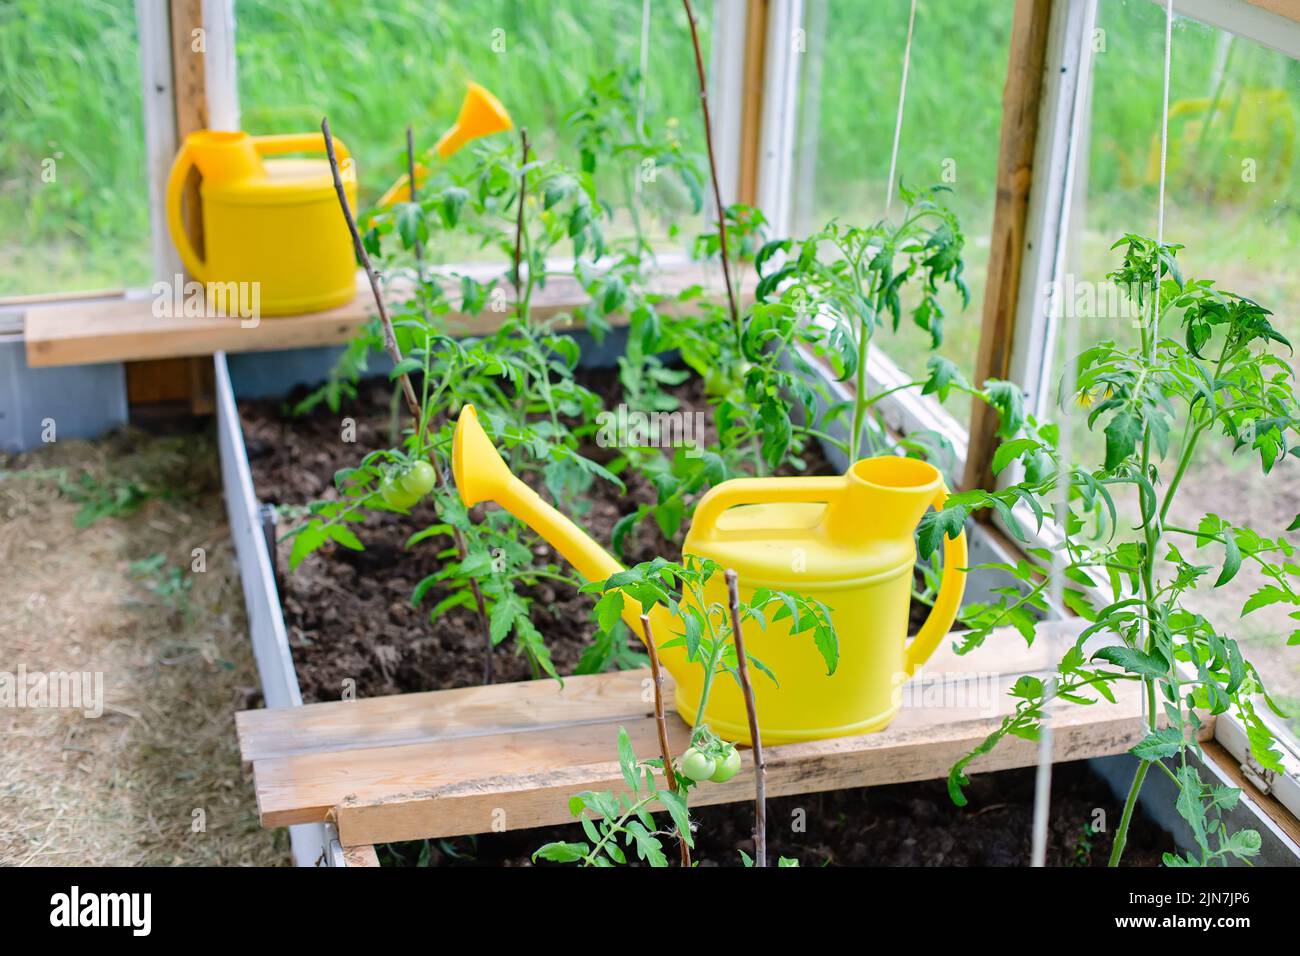 Two yellow plastic watering cans stand next to young tomato bushes Stock Photo